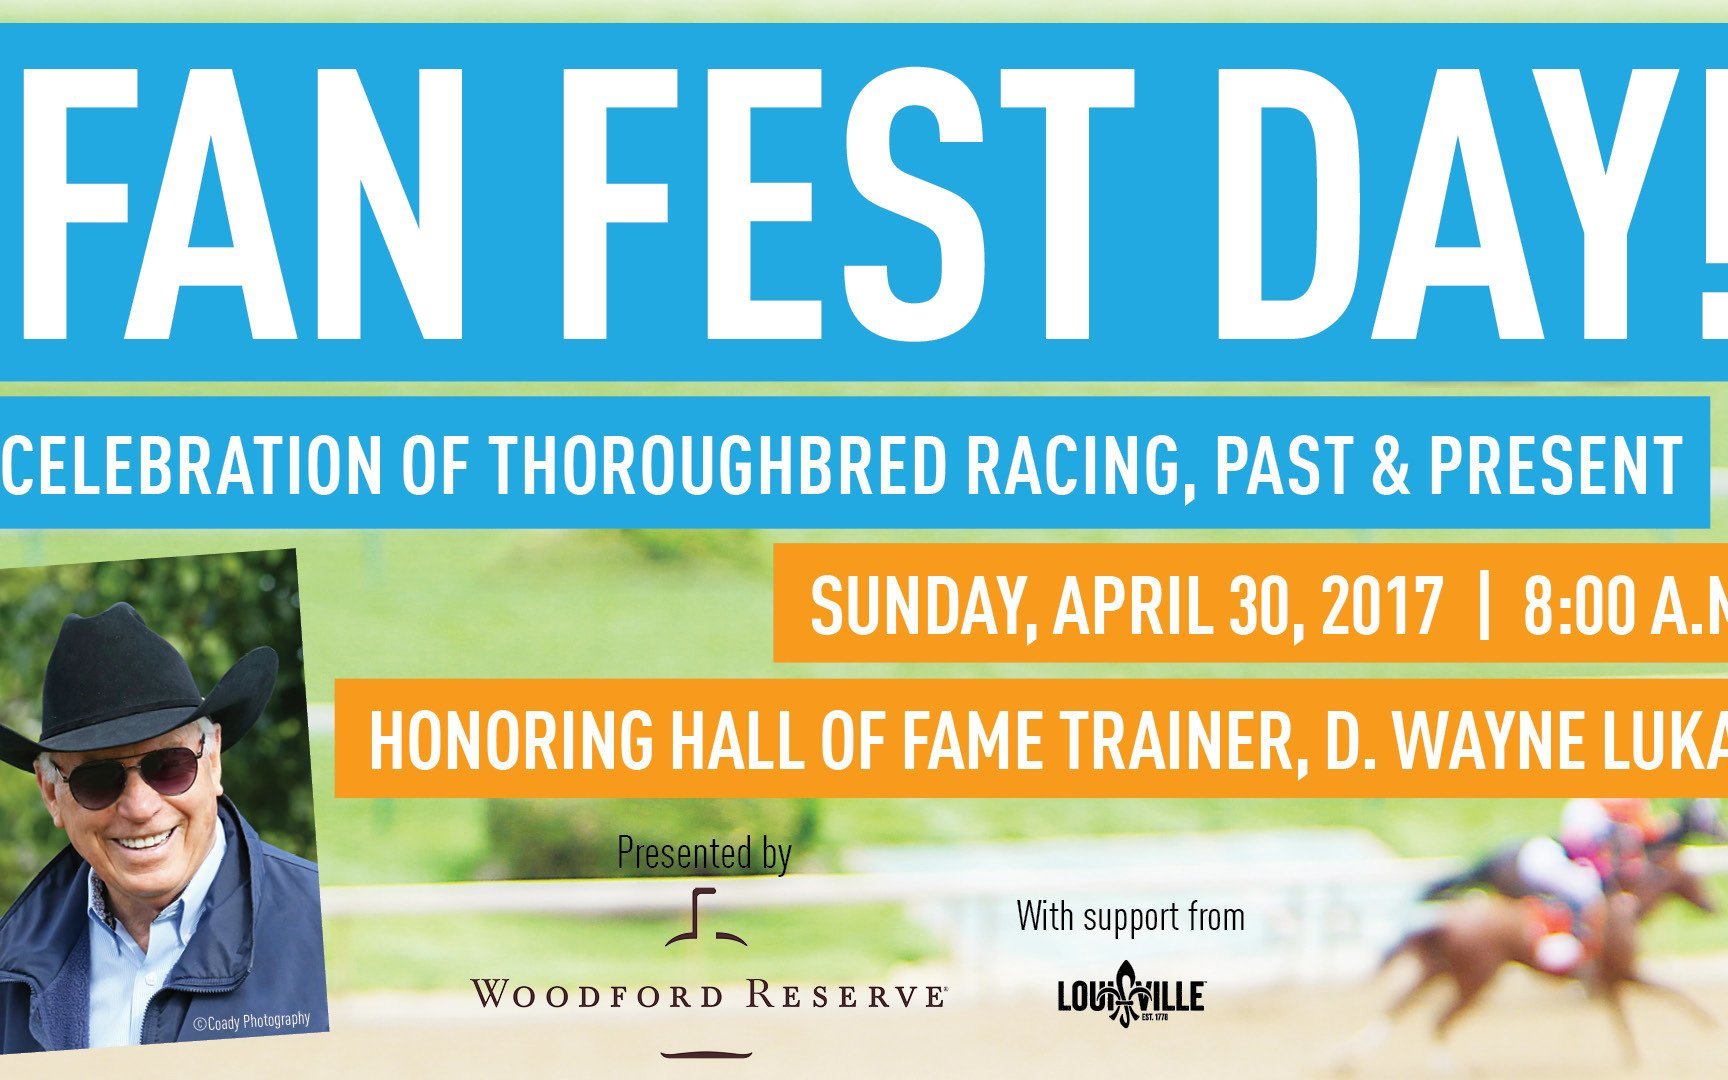 Second annual Fan Fest Day, presented by Woodford Reserve, at the Kentucky Derby Museum to celebrate career of four-time Kentucky Derby winning trainer D. Wayne Lukas